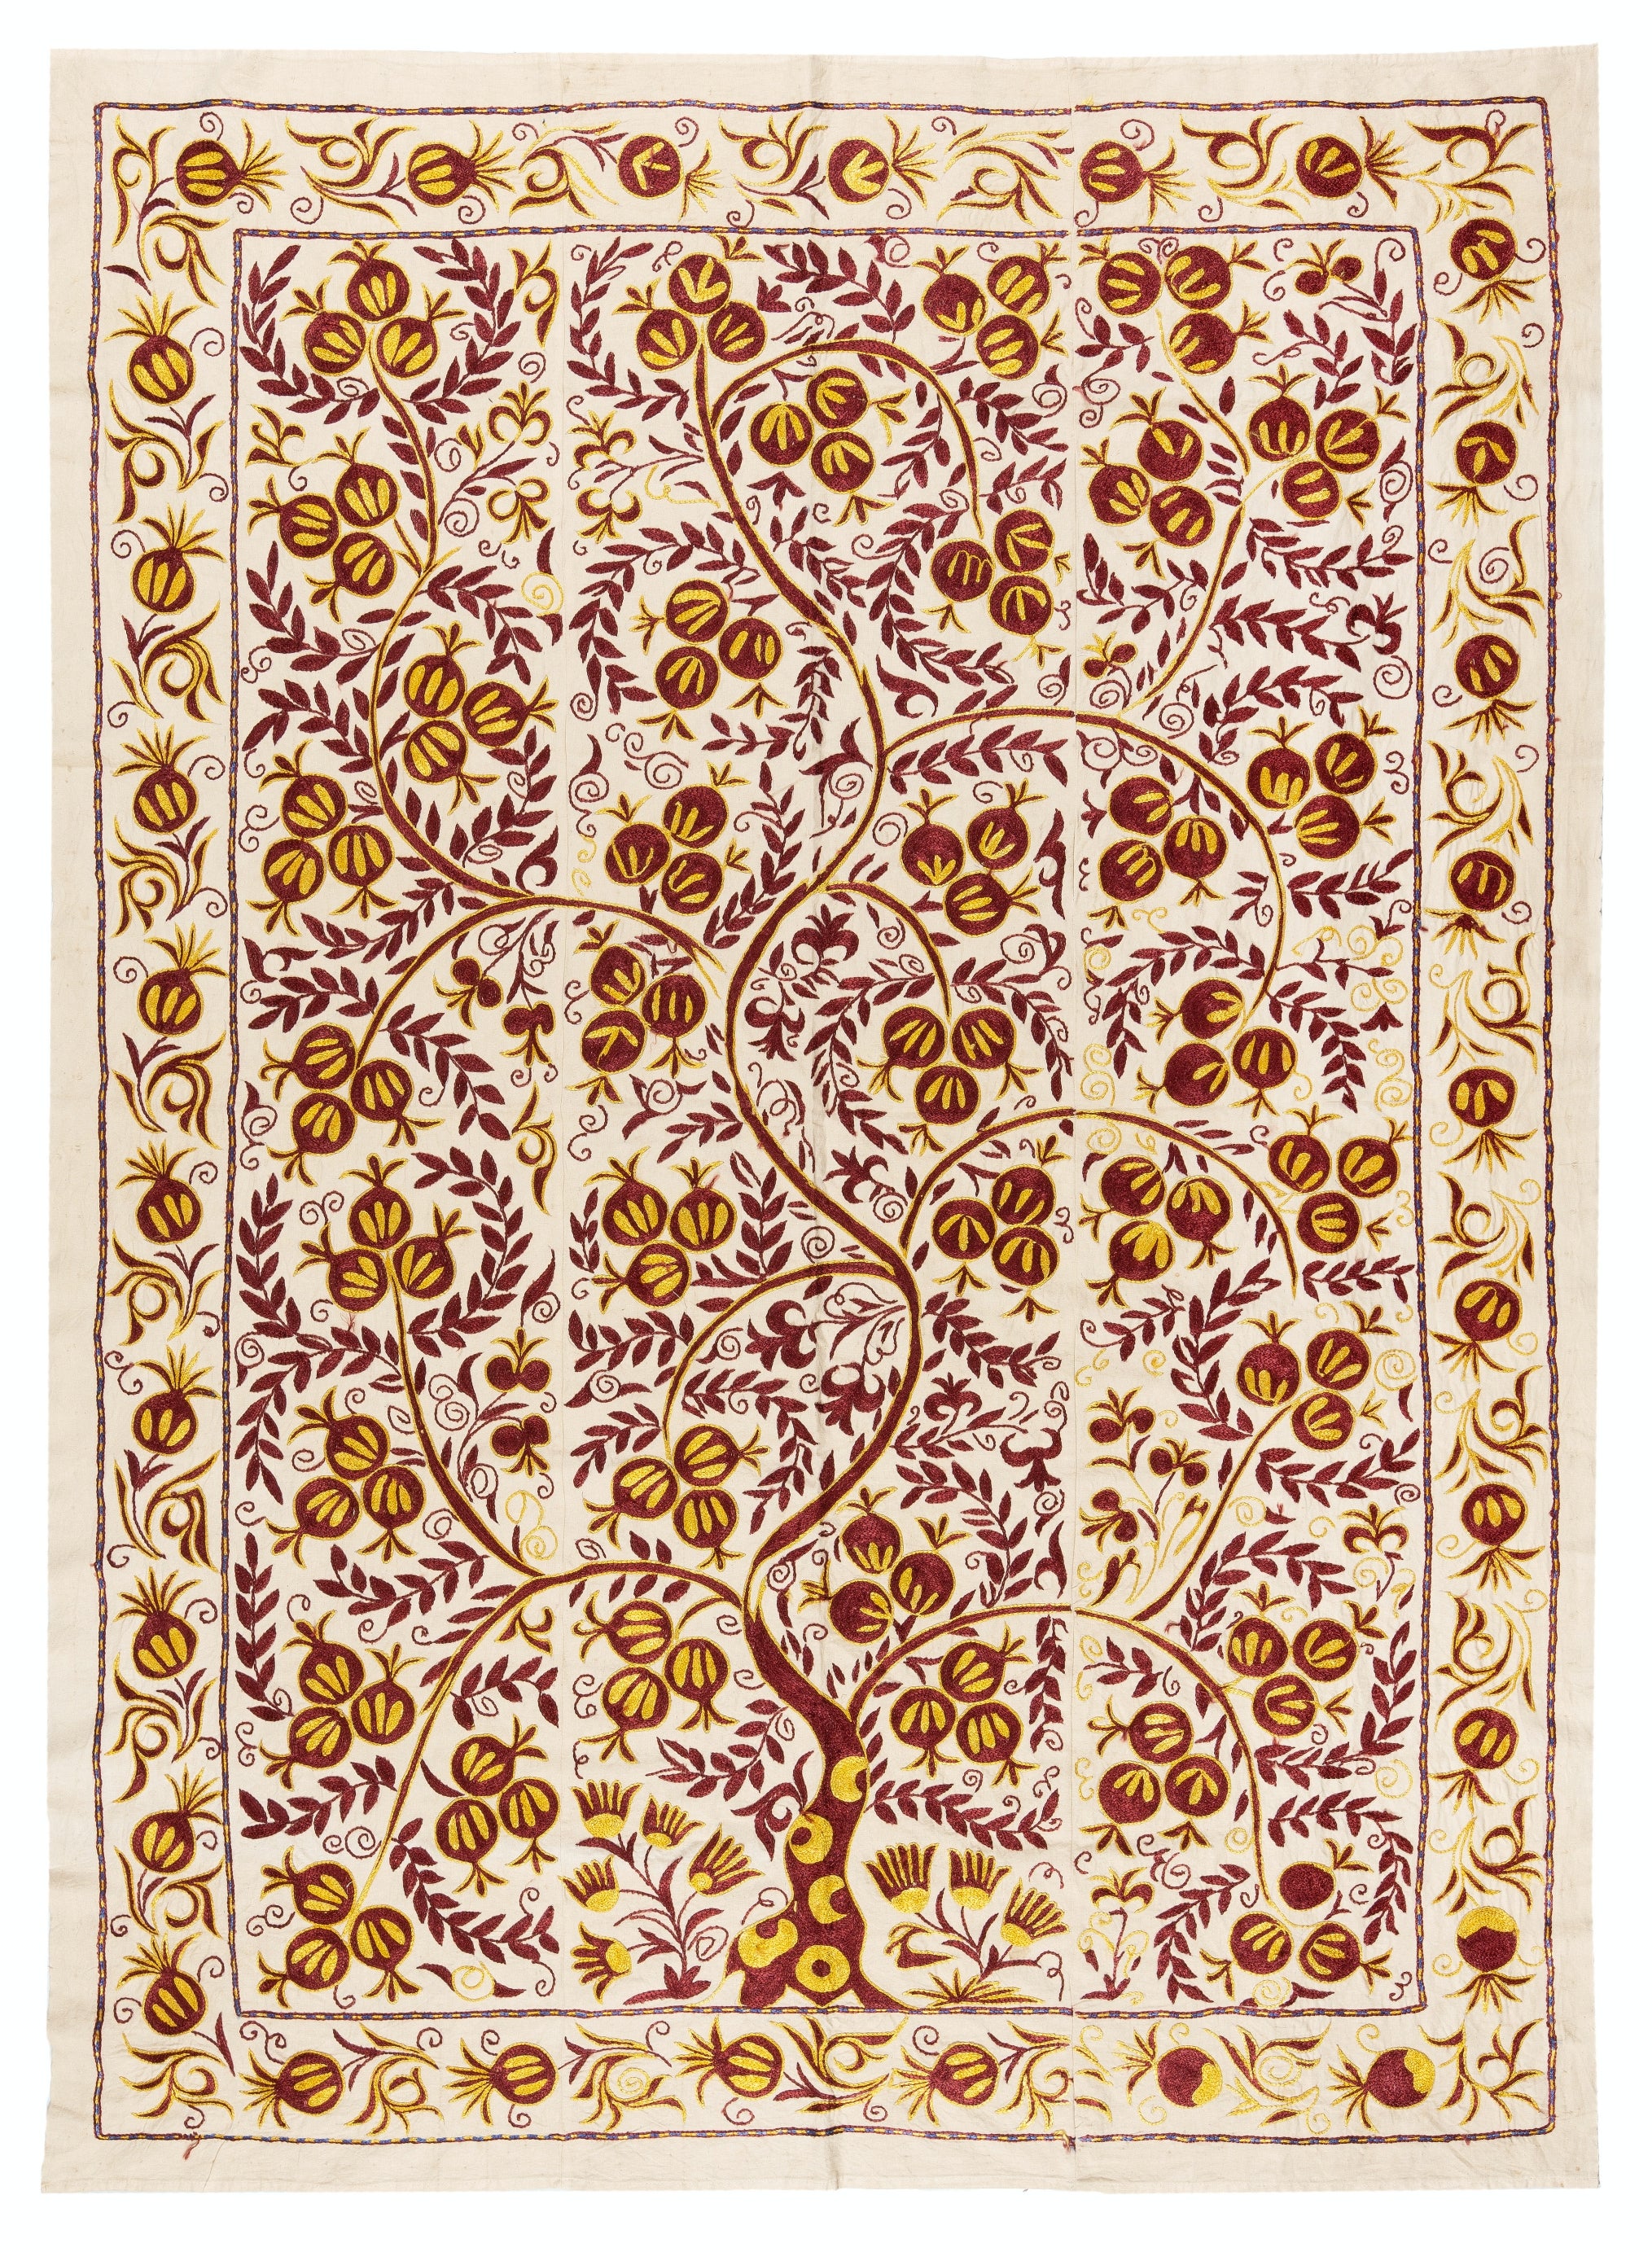 5x6.6 ft Silk Suzani Pomegranate Tree Design Bed Cover, Embroidered Wall Hanging